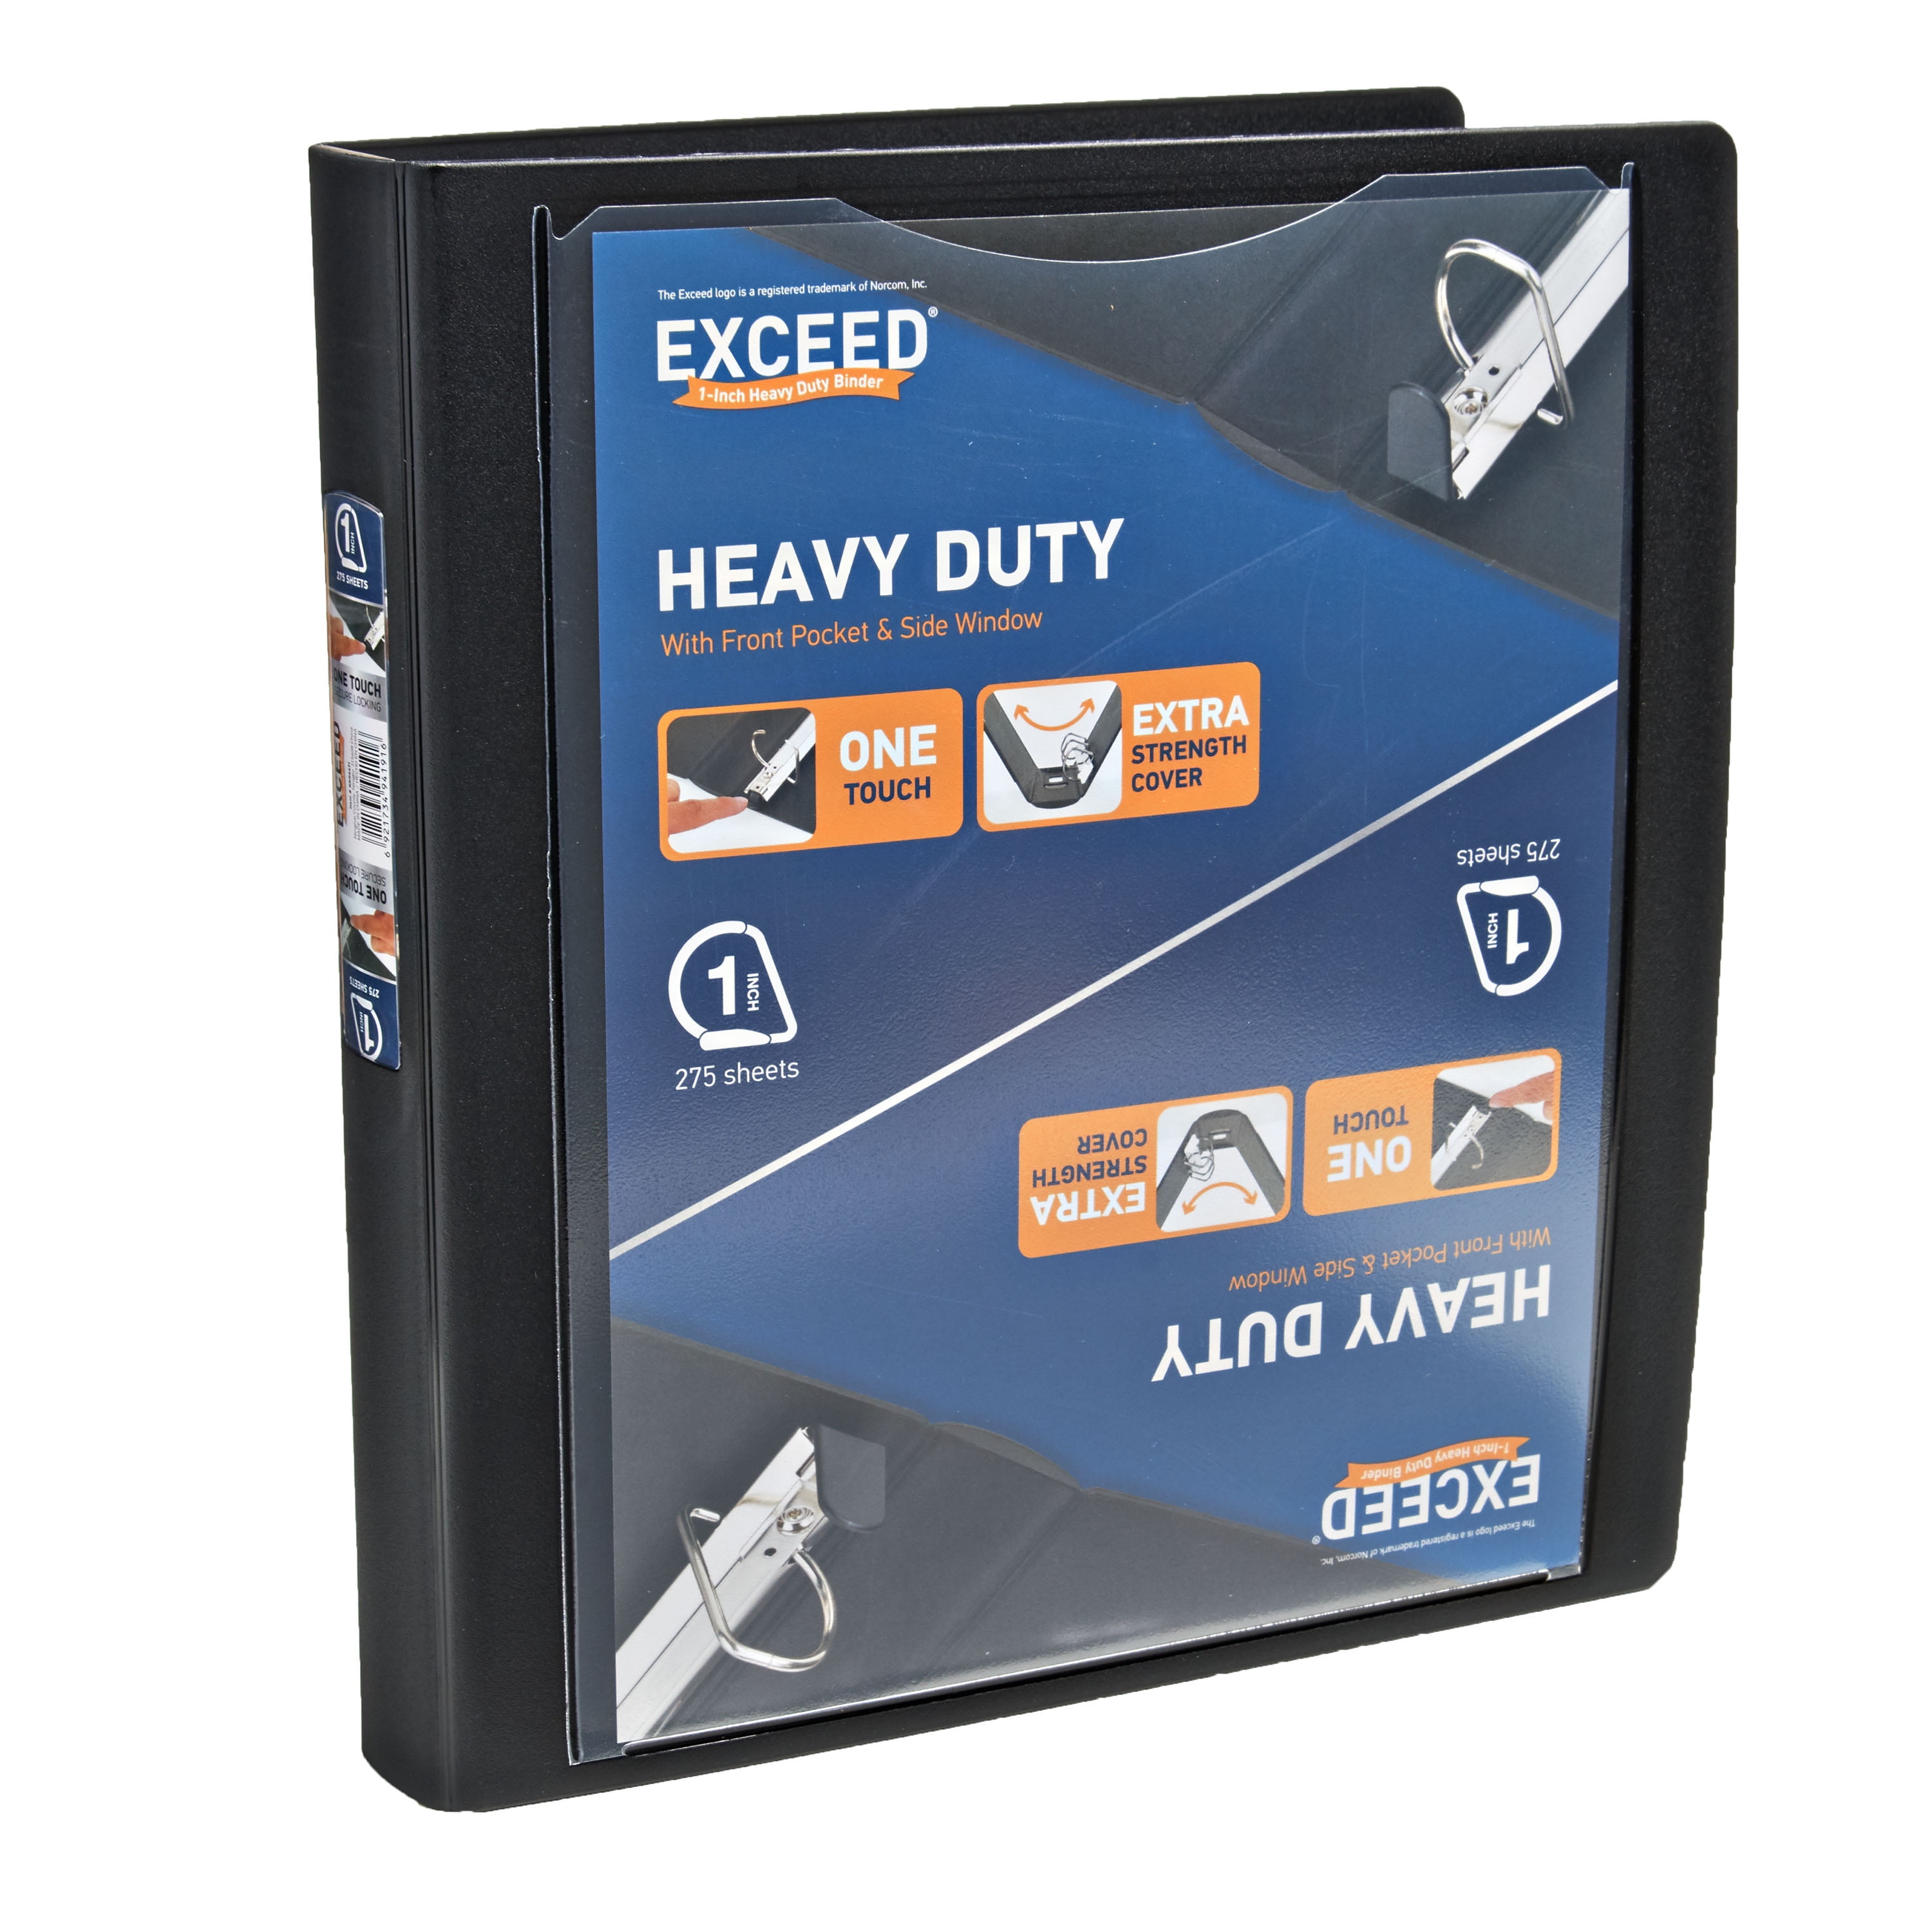 BINDERS EXCEED 1 INCH HEAVY DUTY BINDER Black D RING HOLDS 275 SHEETS 2 